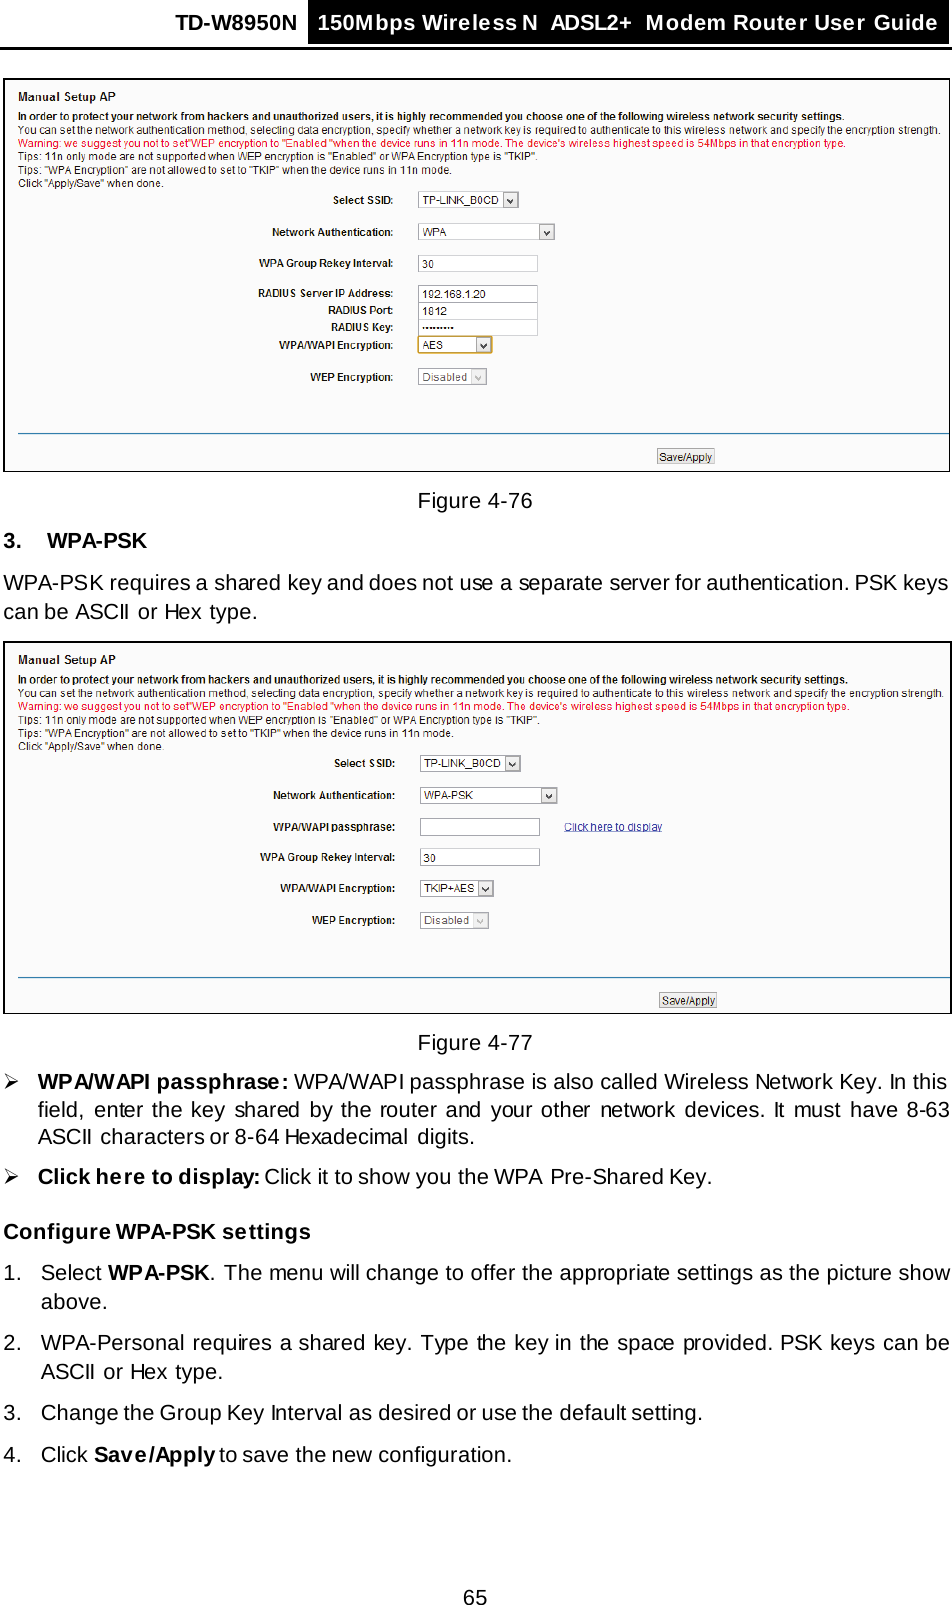 TD-W8950N 150Mbps Wireless N  ADSL2+ Modem Router User Guide  65  Figure 4-76 3. WPA-PSK WPA-PSK requires a shared key and does not use a separate server for authentication. PSK keys can be ASCII  or Hex  type.  Figure 4-77  WPA/WAPI passphrase: WPA/WAPI passphrase is also called Wireless Network Key. In this field, enter the key shared by the router and your other network devices. It must have  8-63 ASCII  characters or 8-64 Hexadecimal  digits.  Click here to display: Click it to show you the WPA Pre-Shared Key. Configure WPA-PSK settings 1.  Select WPA-PSK. The menu will change to offer the appropriate settings as the picture show above. 2. WPA-Personal requires a shared key. Type the key in the space provided. PSK keys can be ASCII or Hex type. 3. Change the Group Key Interval as desired or use the default setting. 4. Click Save/Apply to save the new  configuration. 